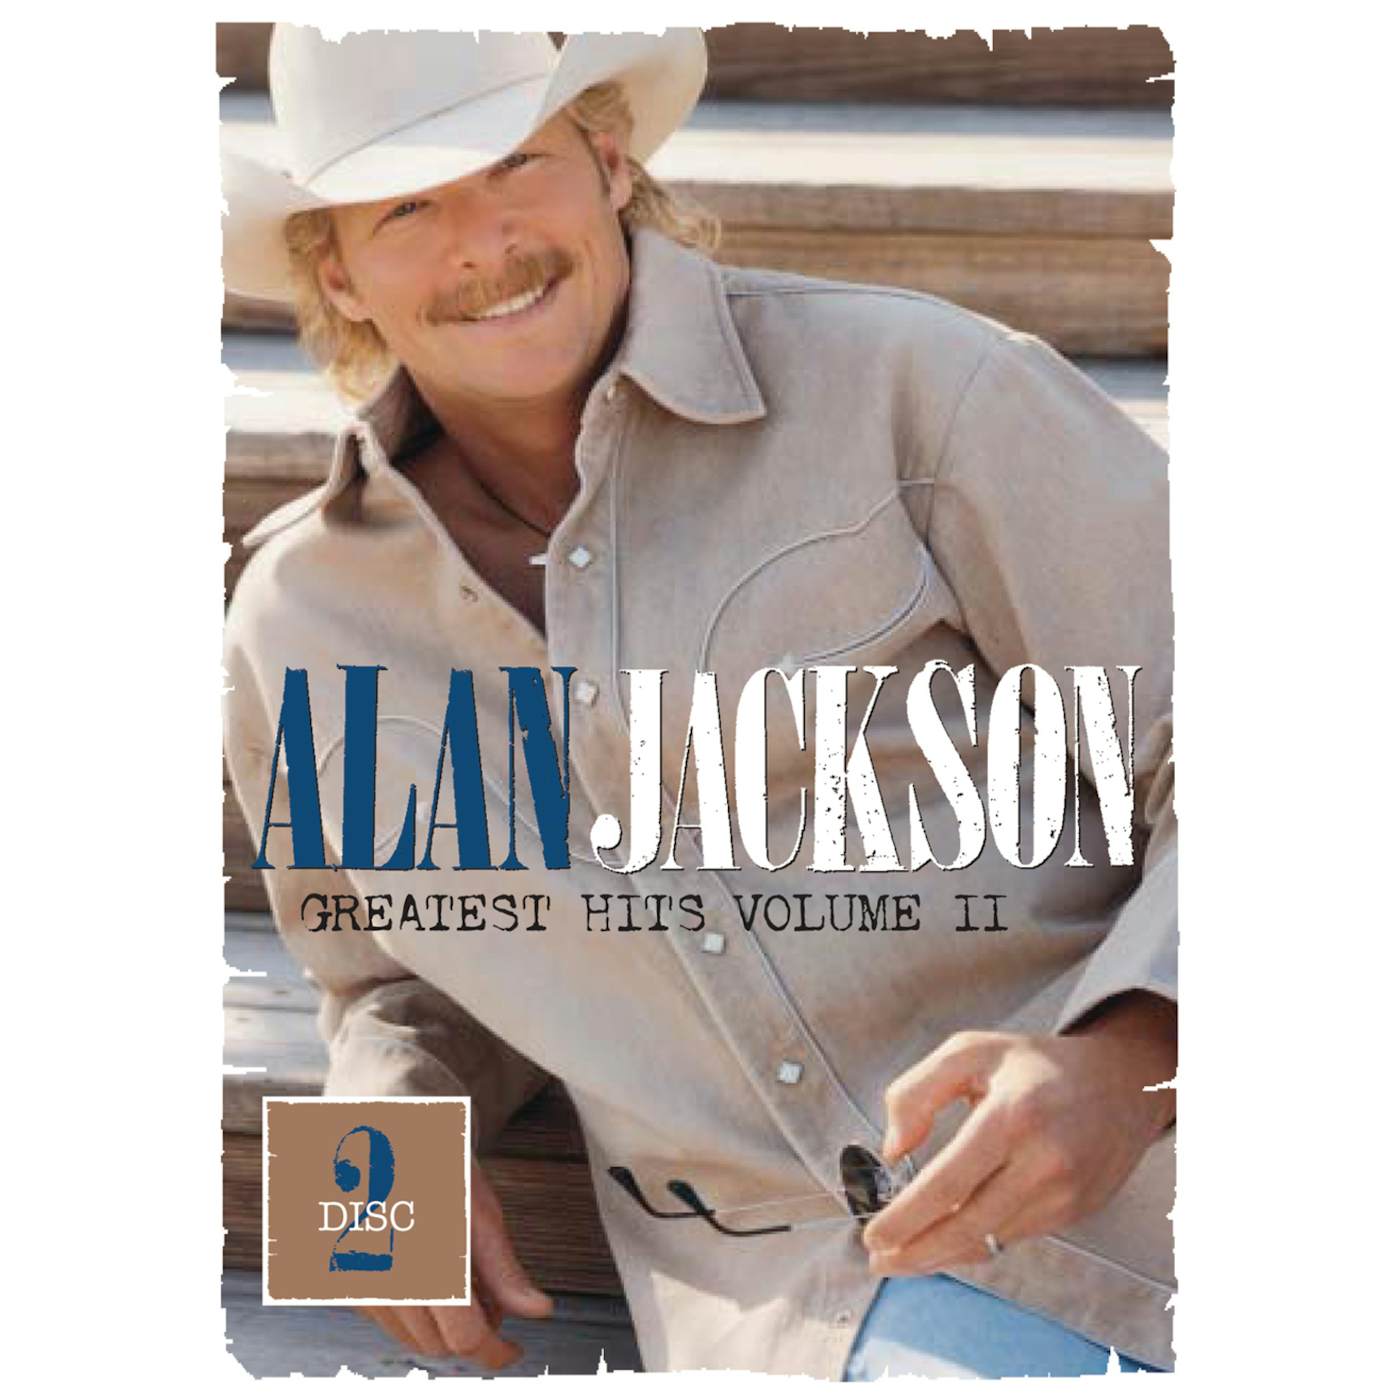 Alan Jackson - The Greatest Hits Collection (Vinyl 2LP) - Music Direct